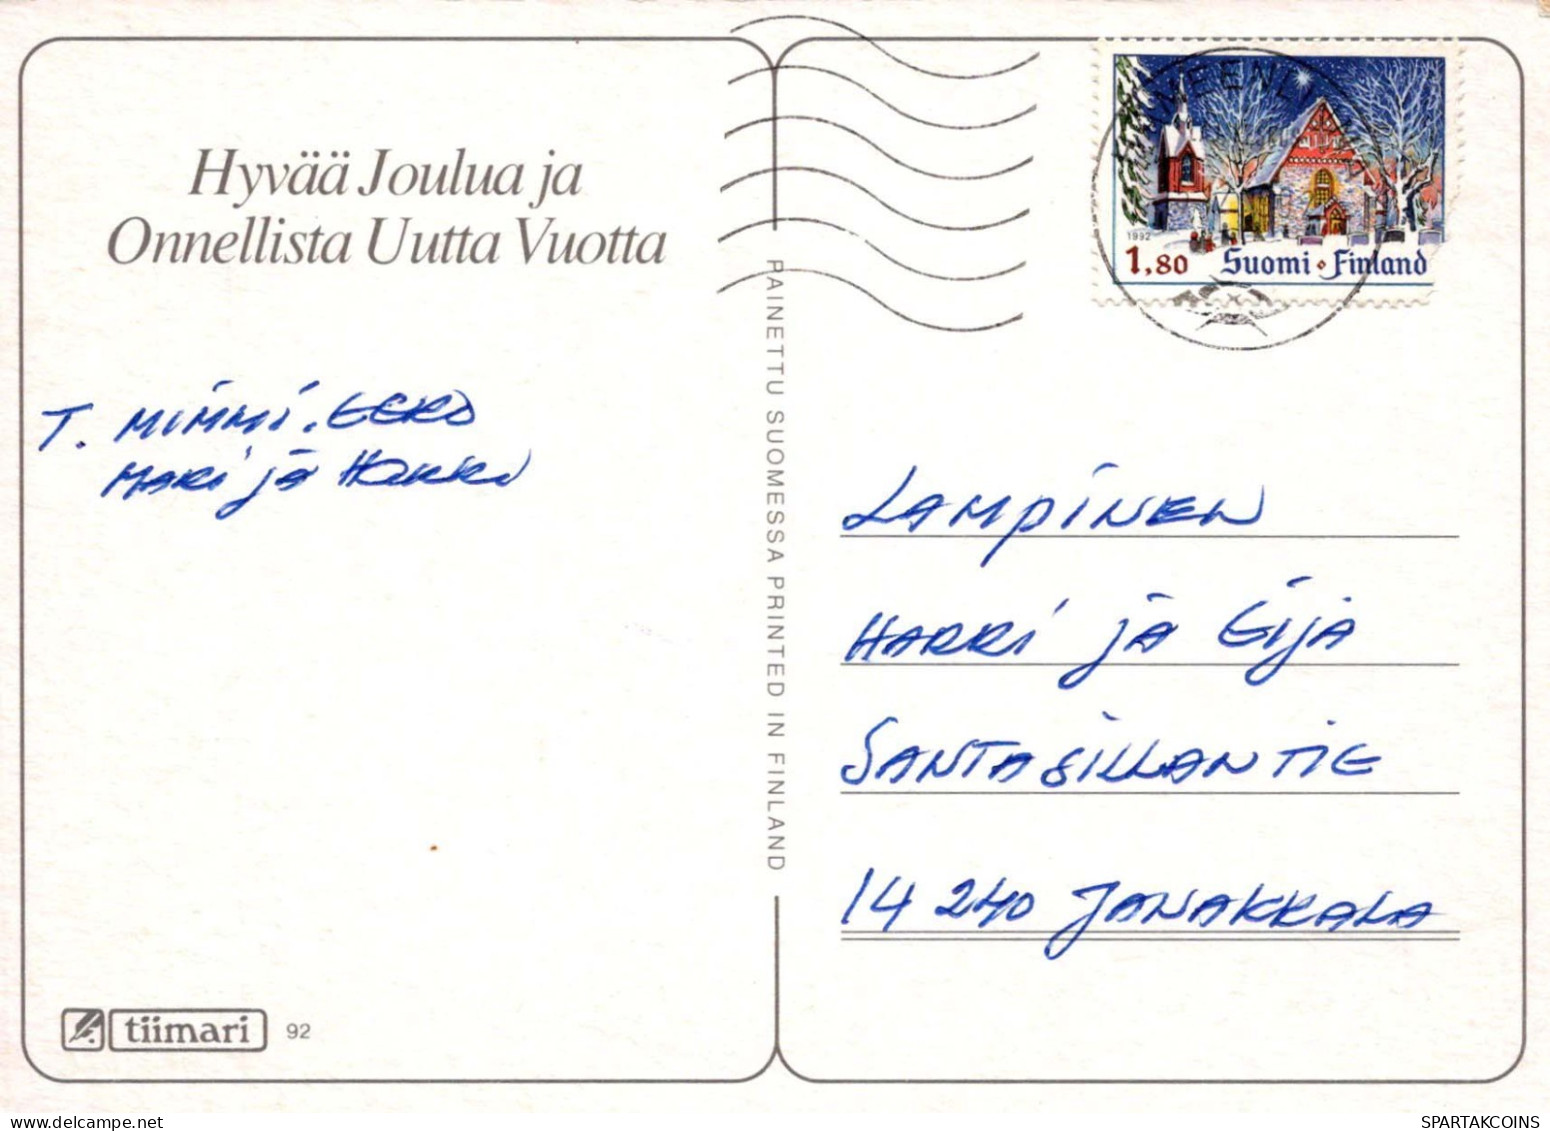 BABBO NATALE Buon Anno Natale Vintage Cartolina CPSM #PBL376.IT - Kerstman